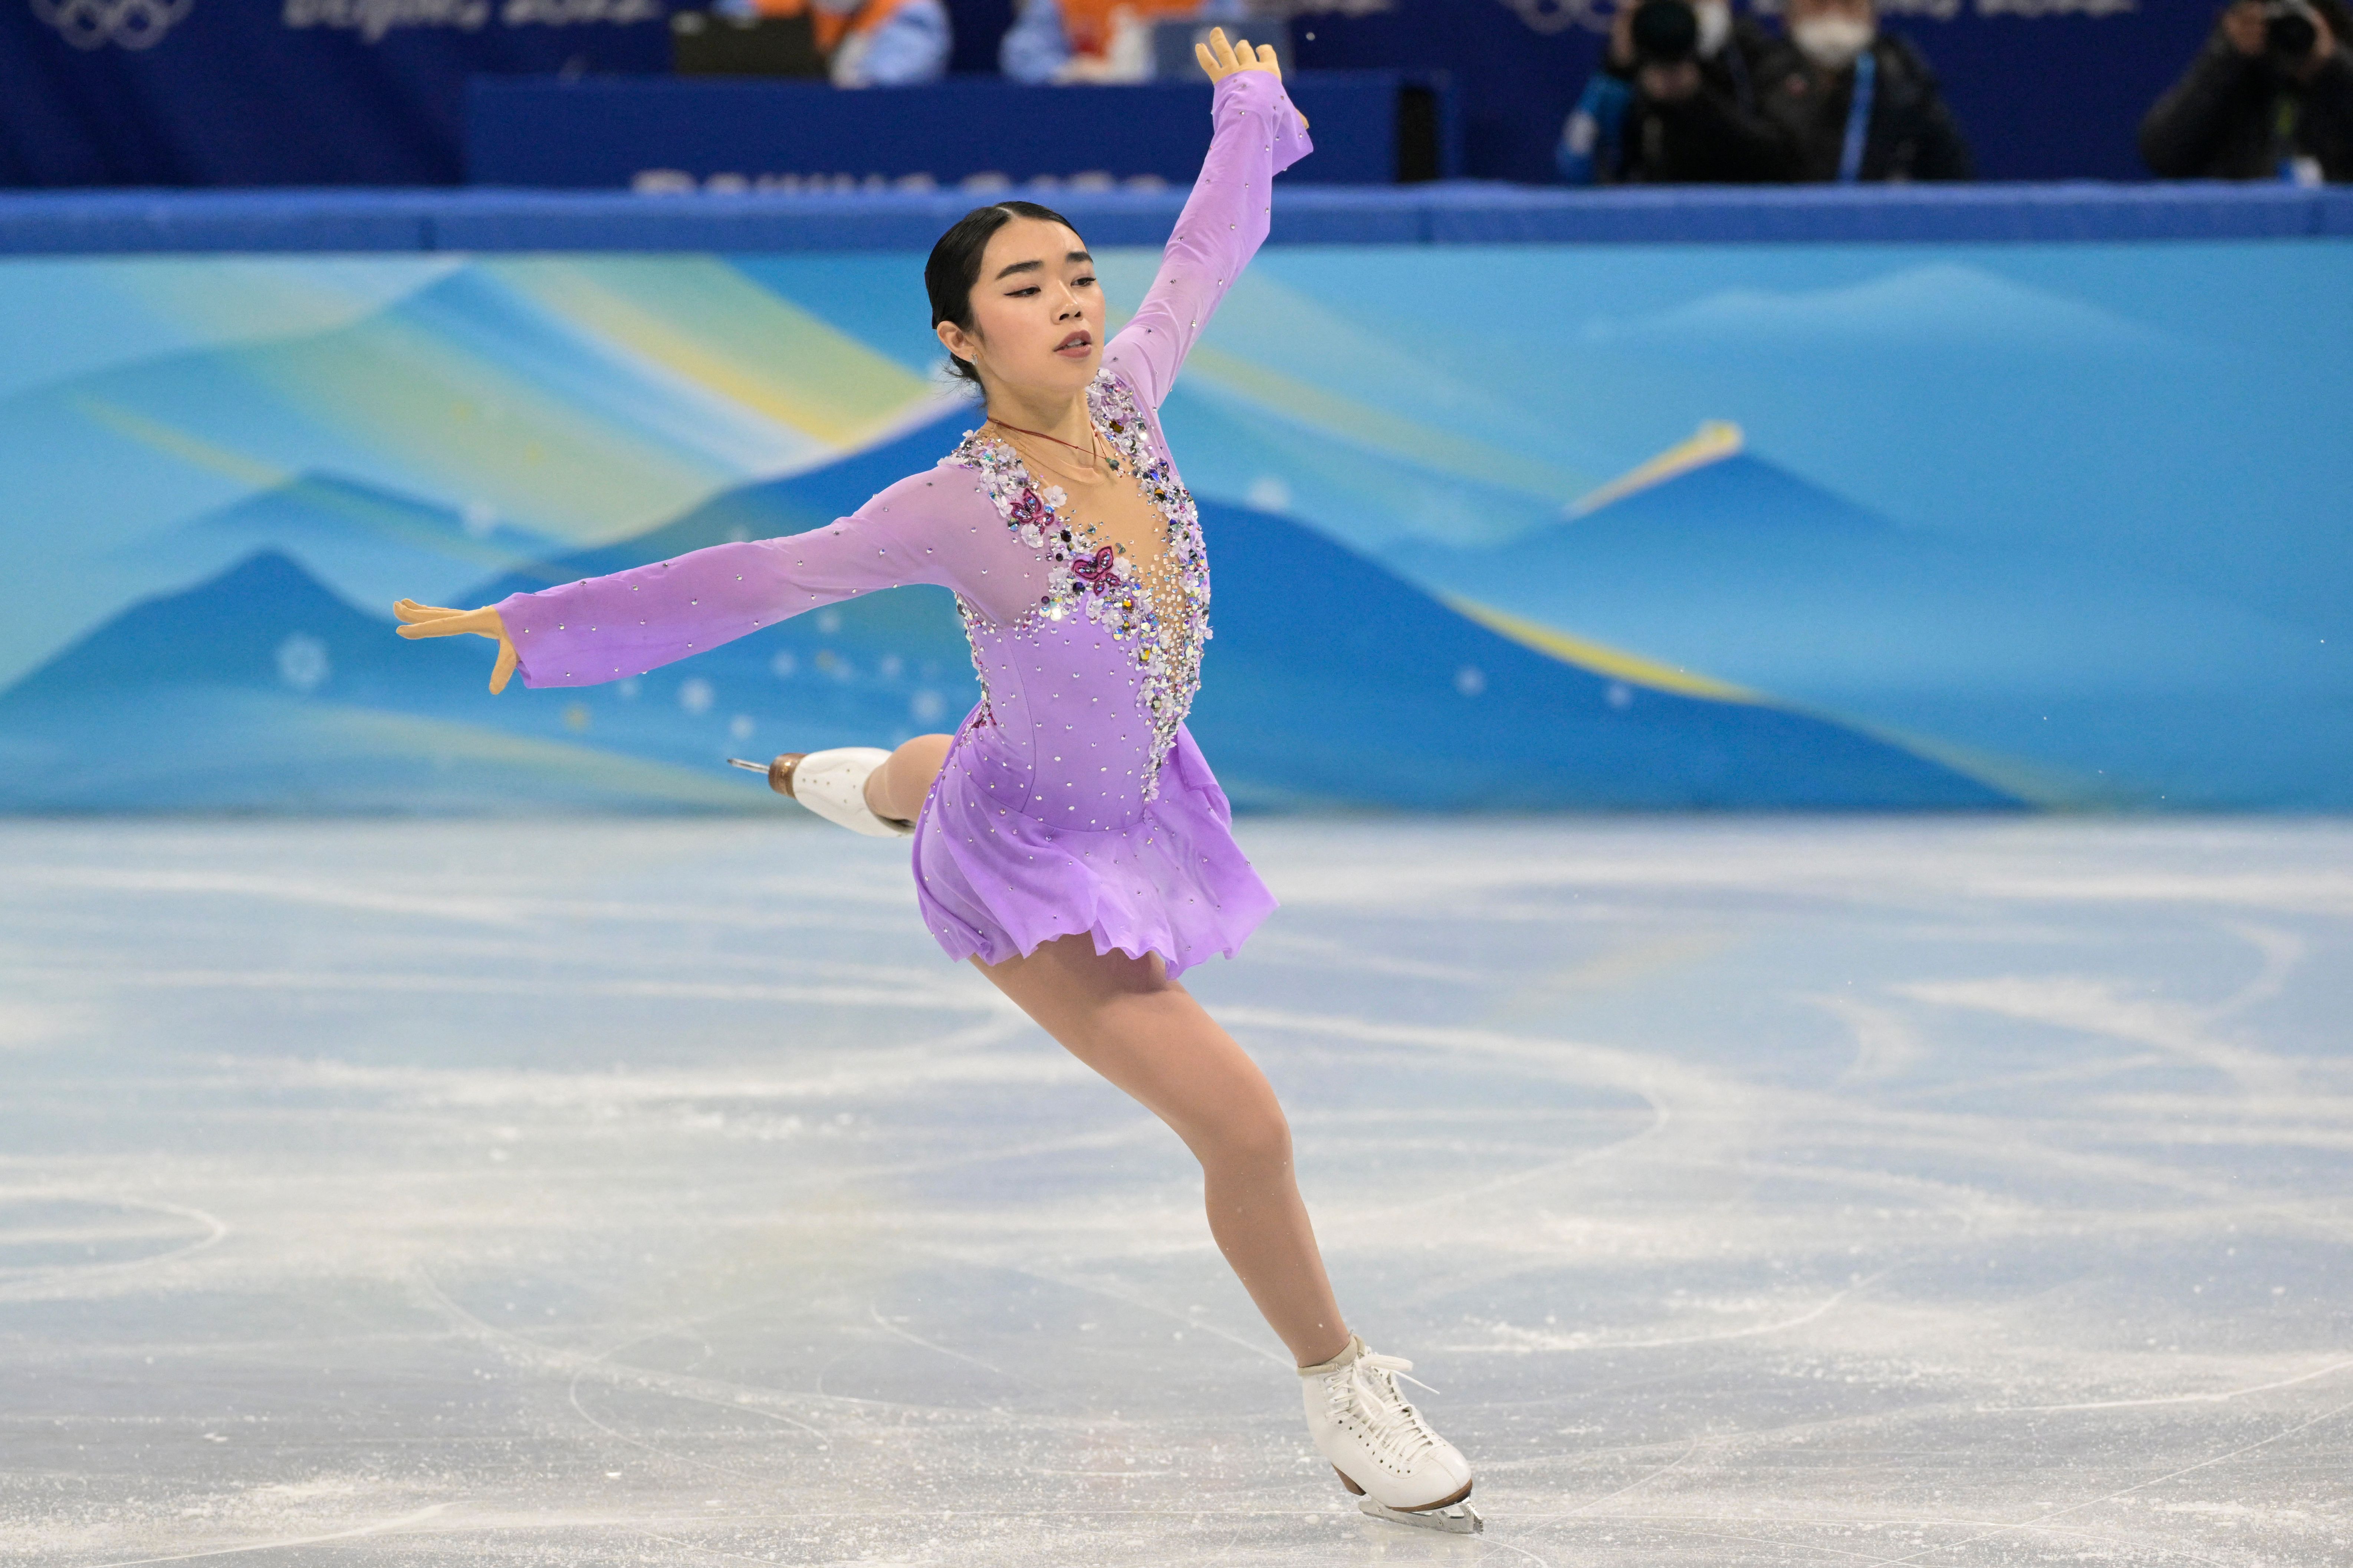 Who Is Karen Chen? What to Know About This USA Figure Skater Competing in the Winter Olympics